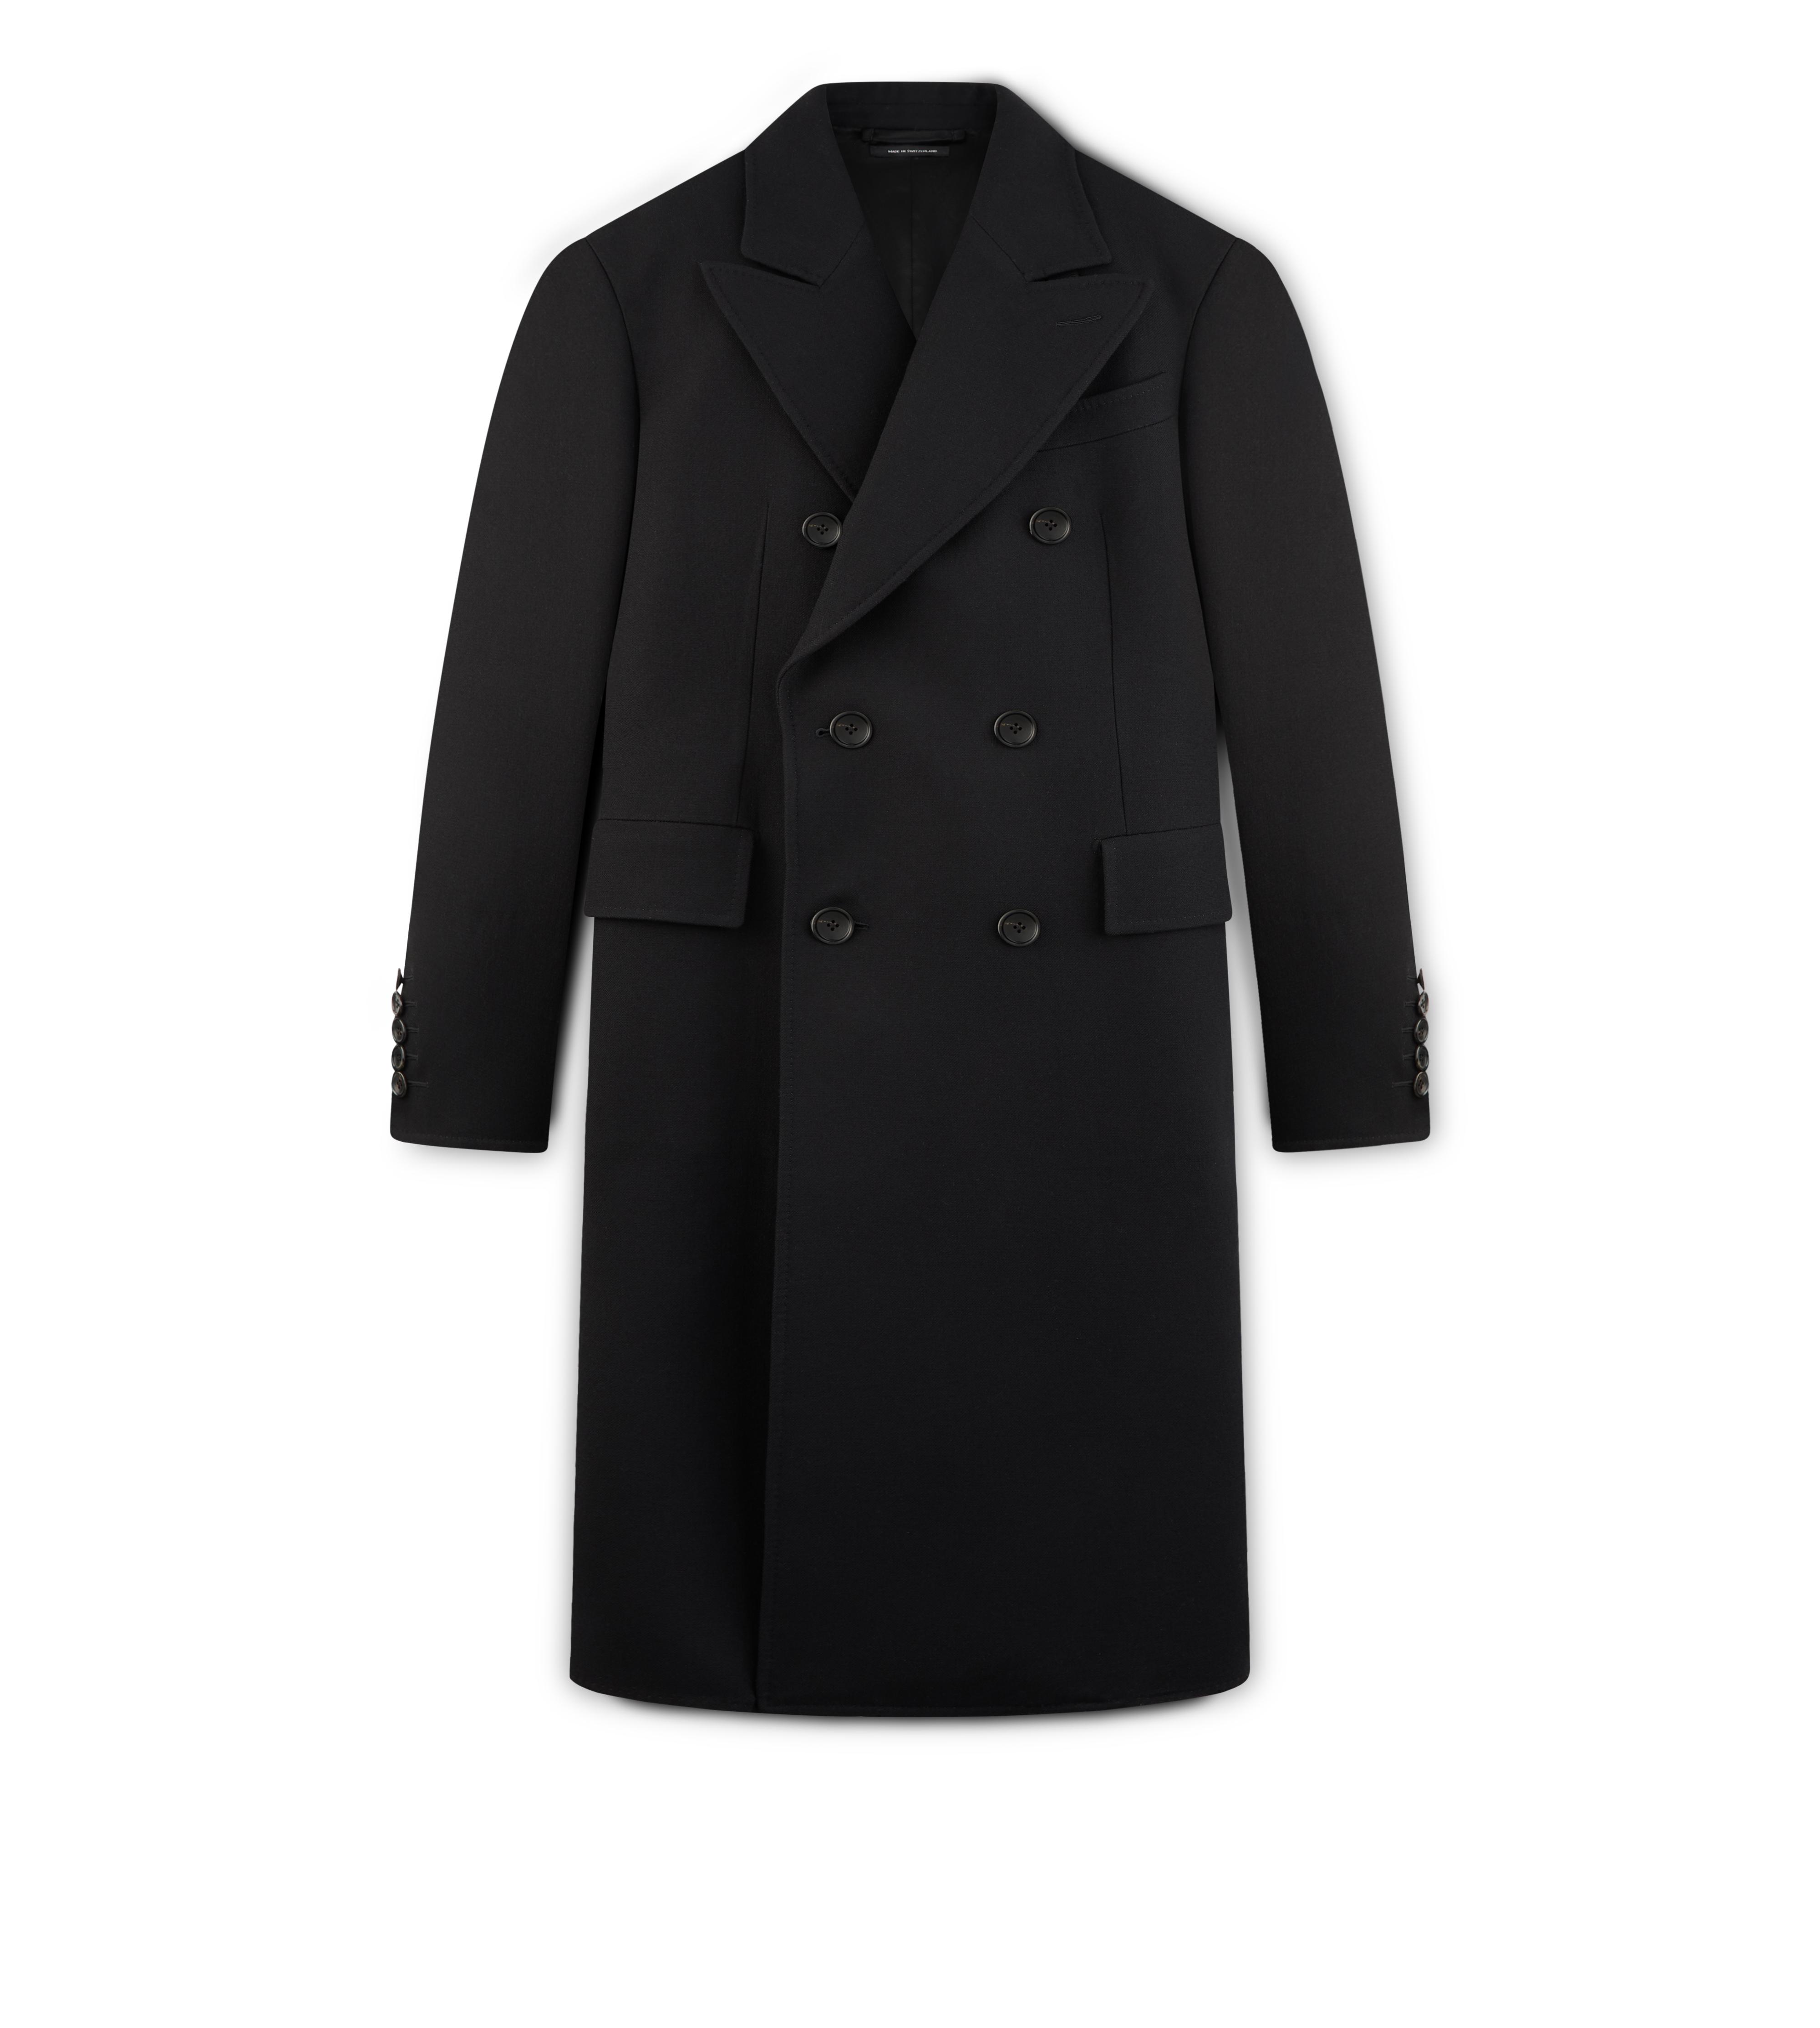 TOM FORD Men's Double-Breasted Military Coat